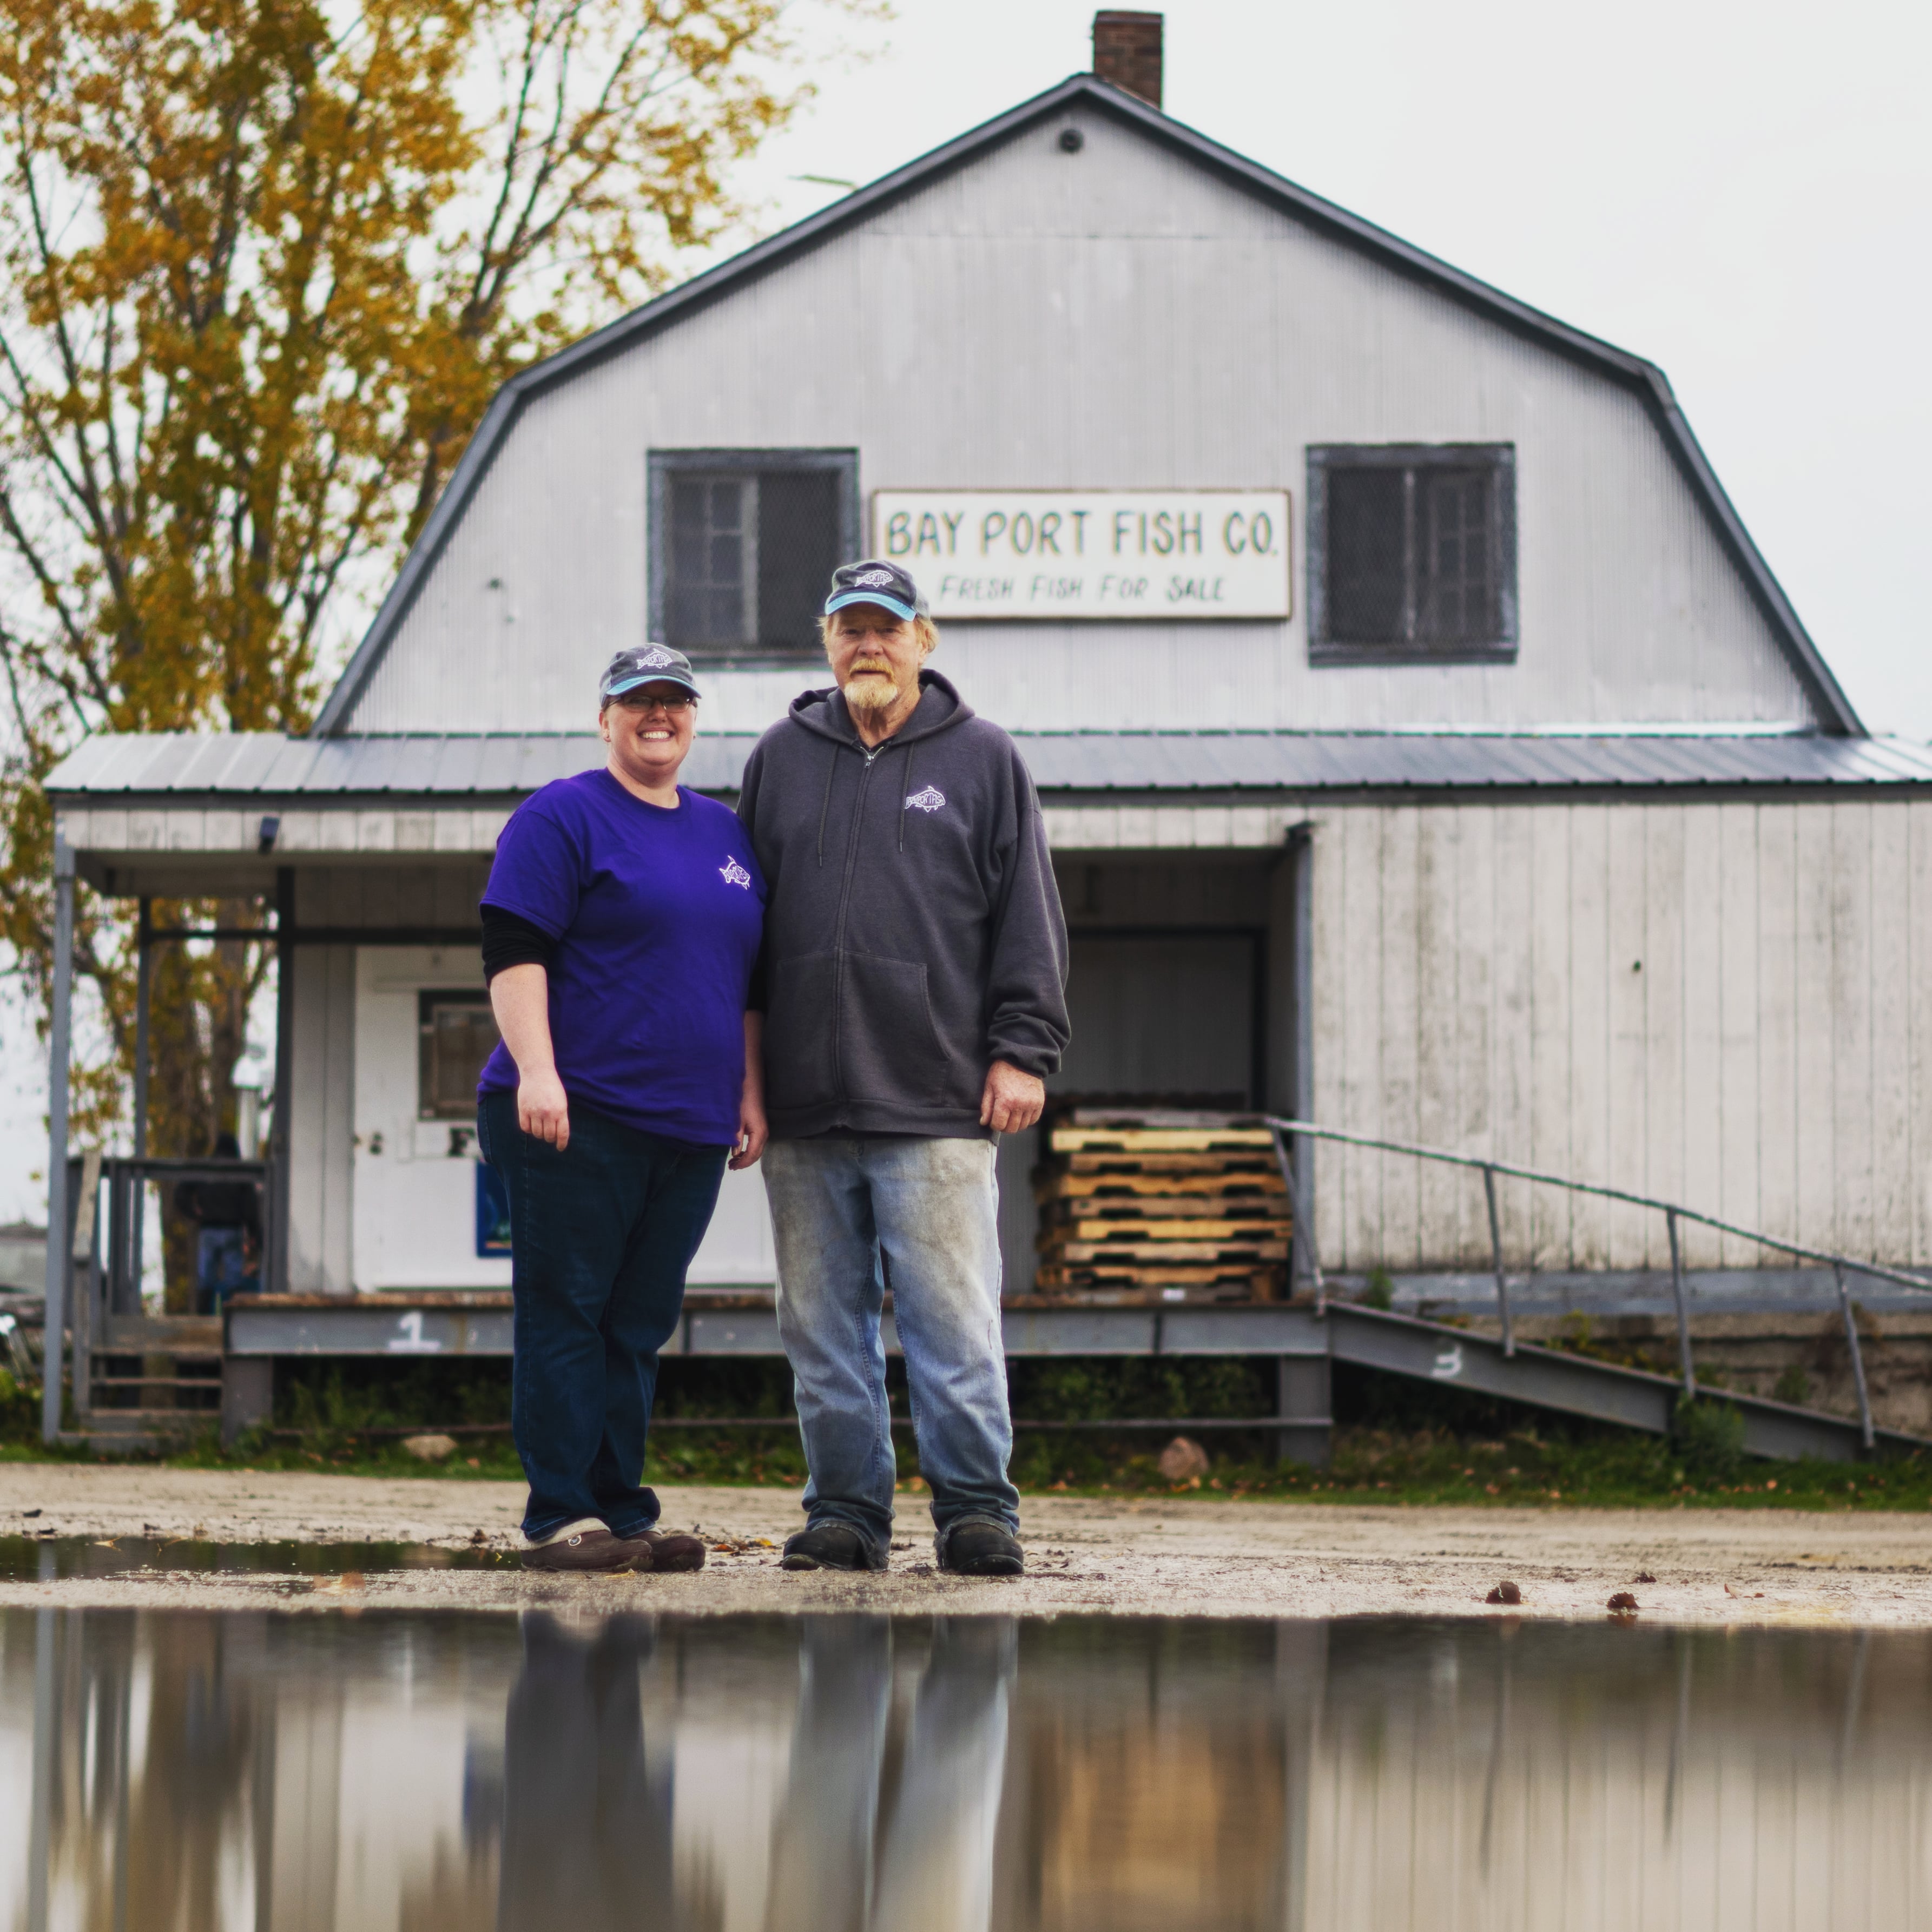 Owners of Bay Port Fish Co